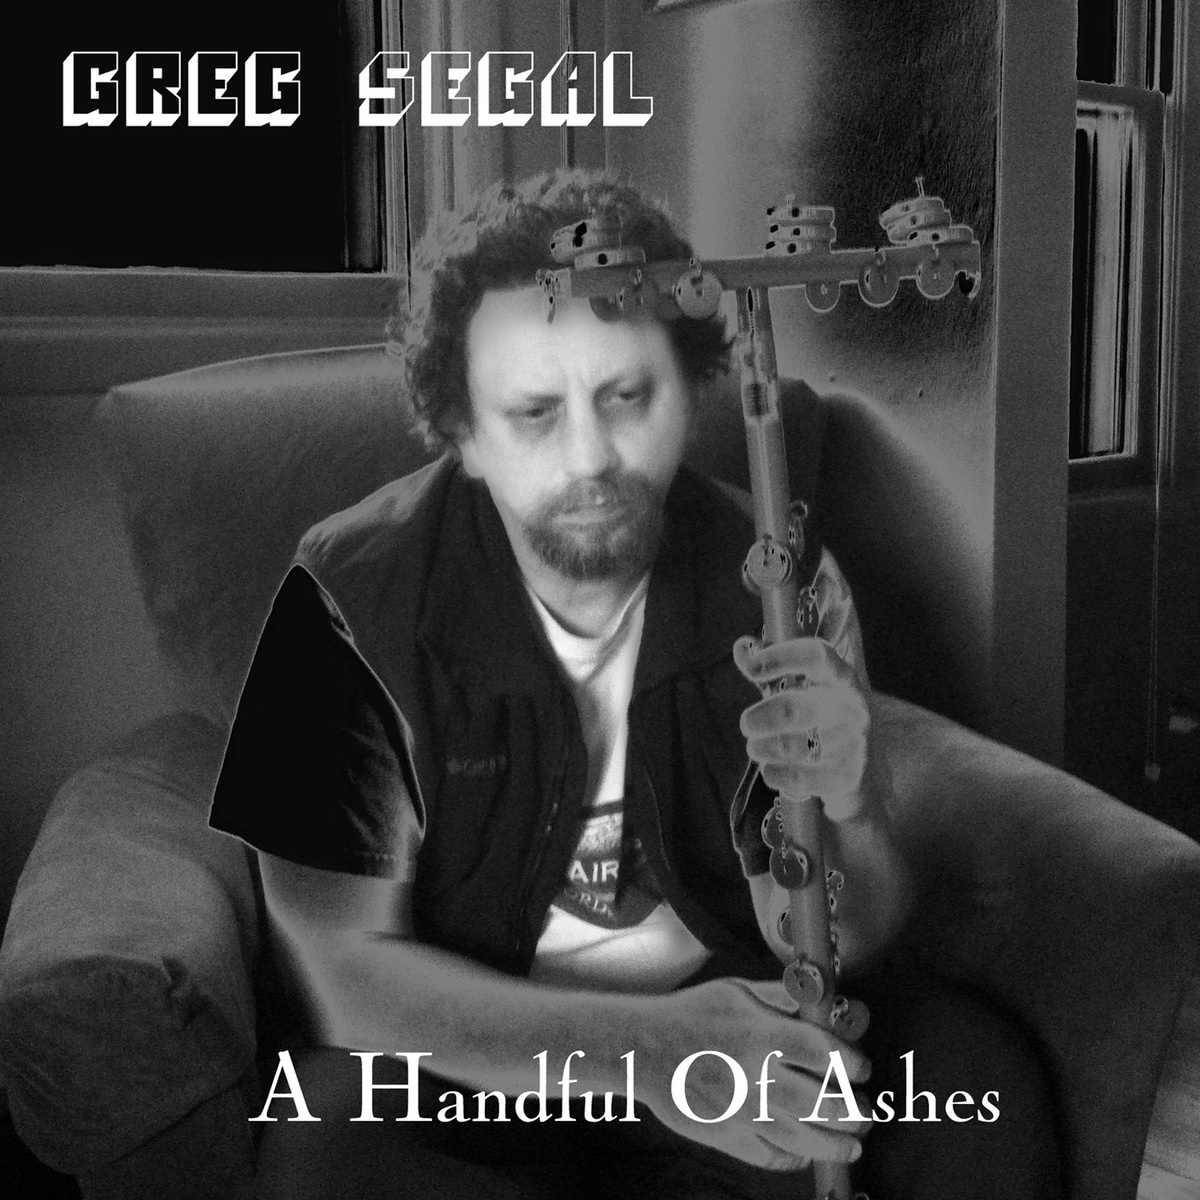 Greg Segal — A Handful of Ashes